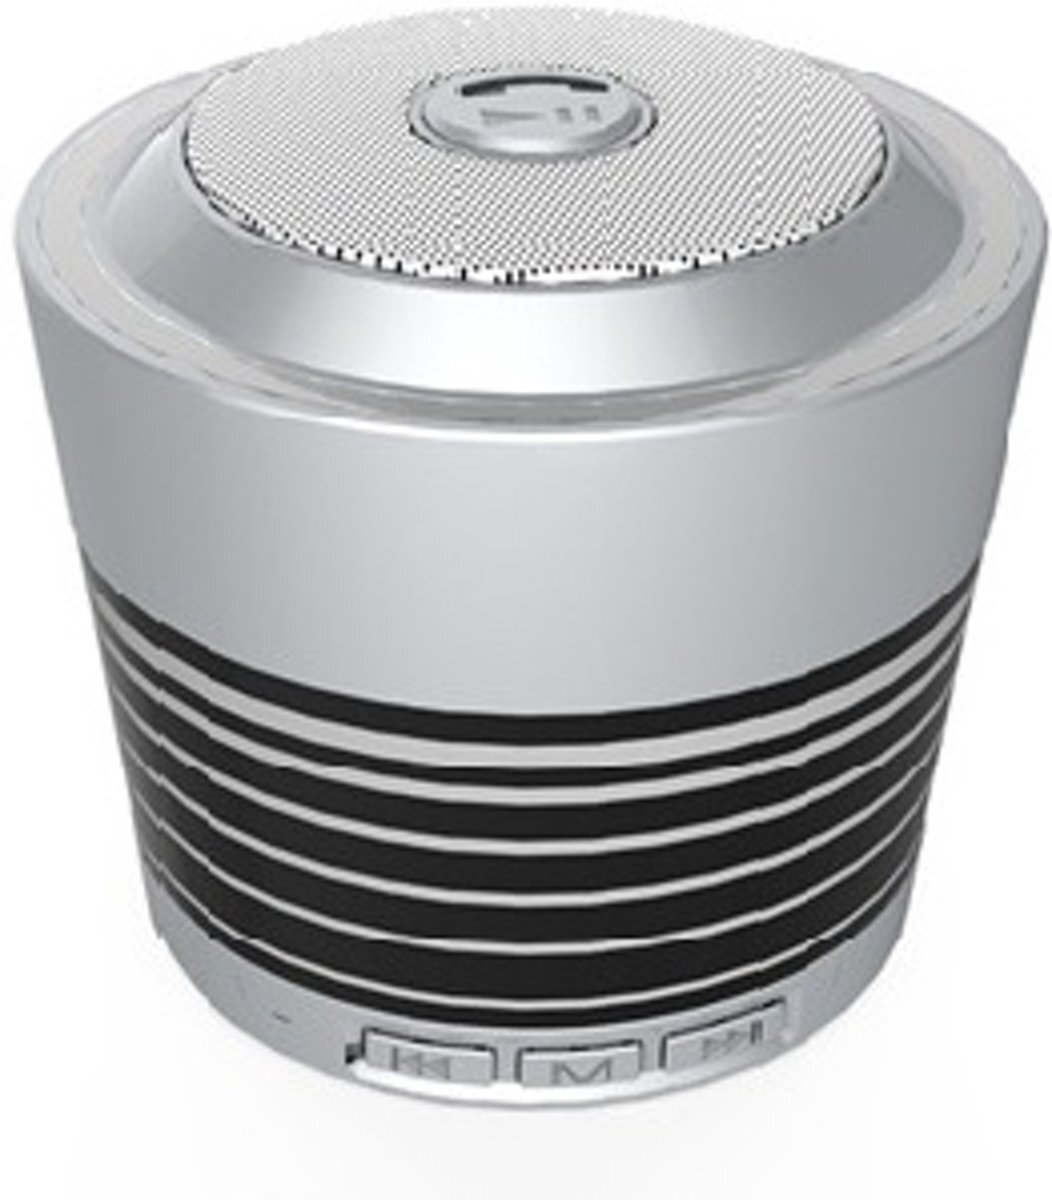 Evertech Bluetooth Stereo Speaker with FM Radio _ Silver zilver